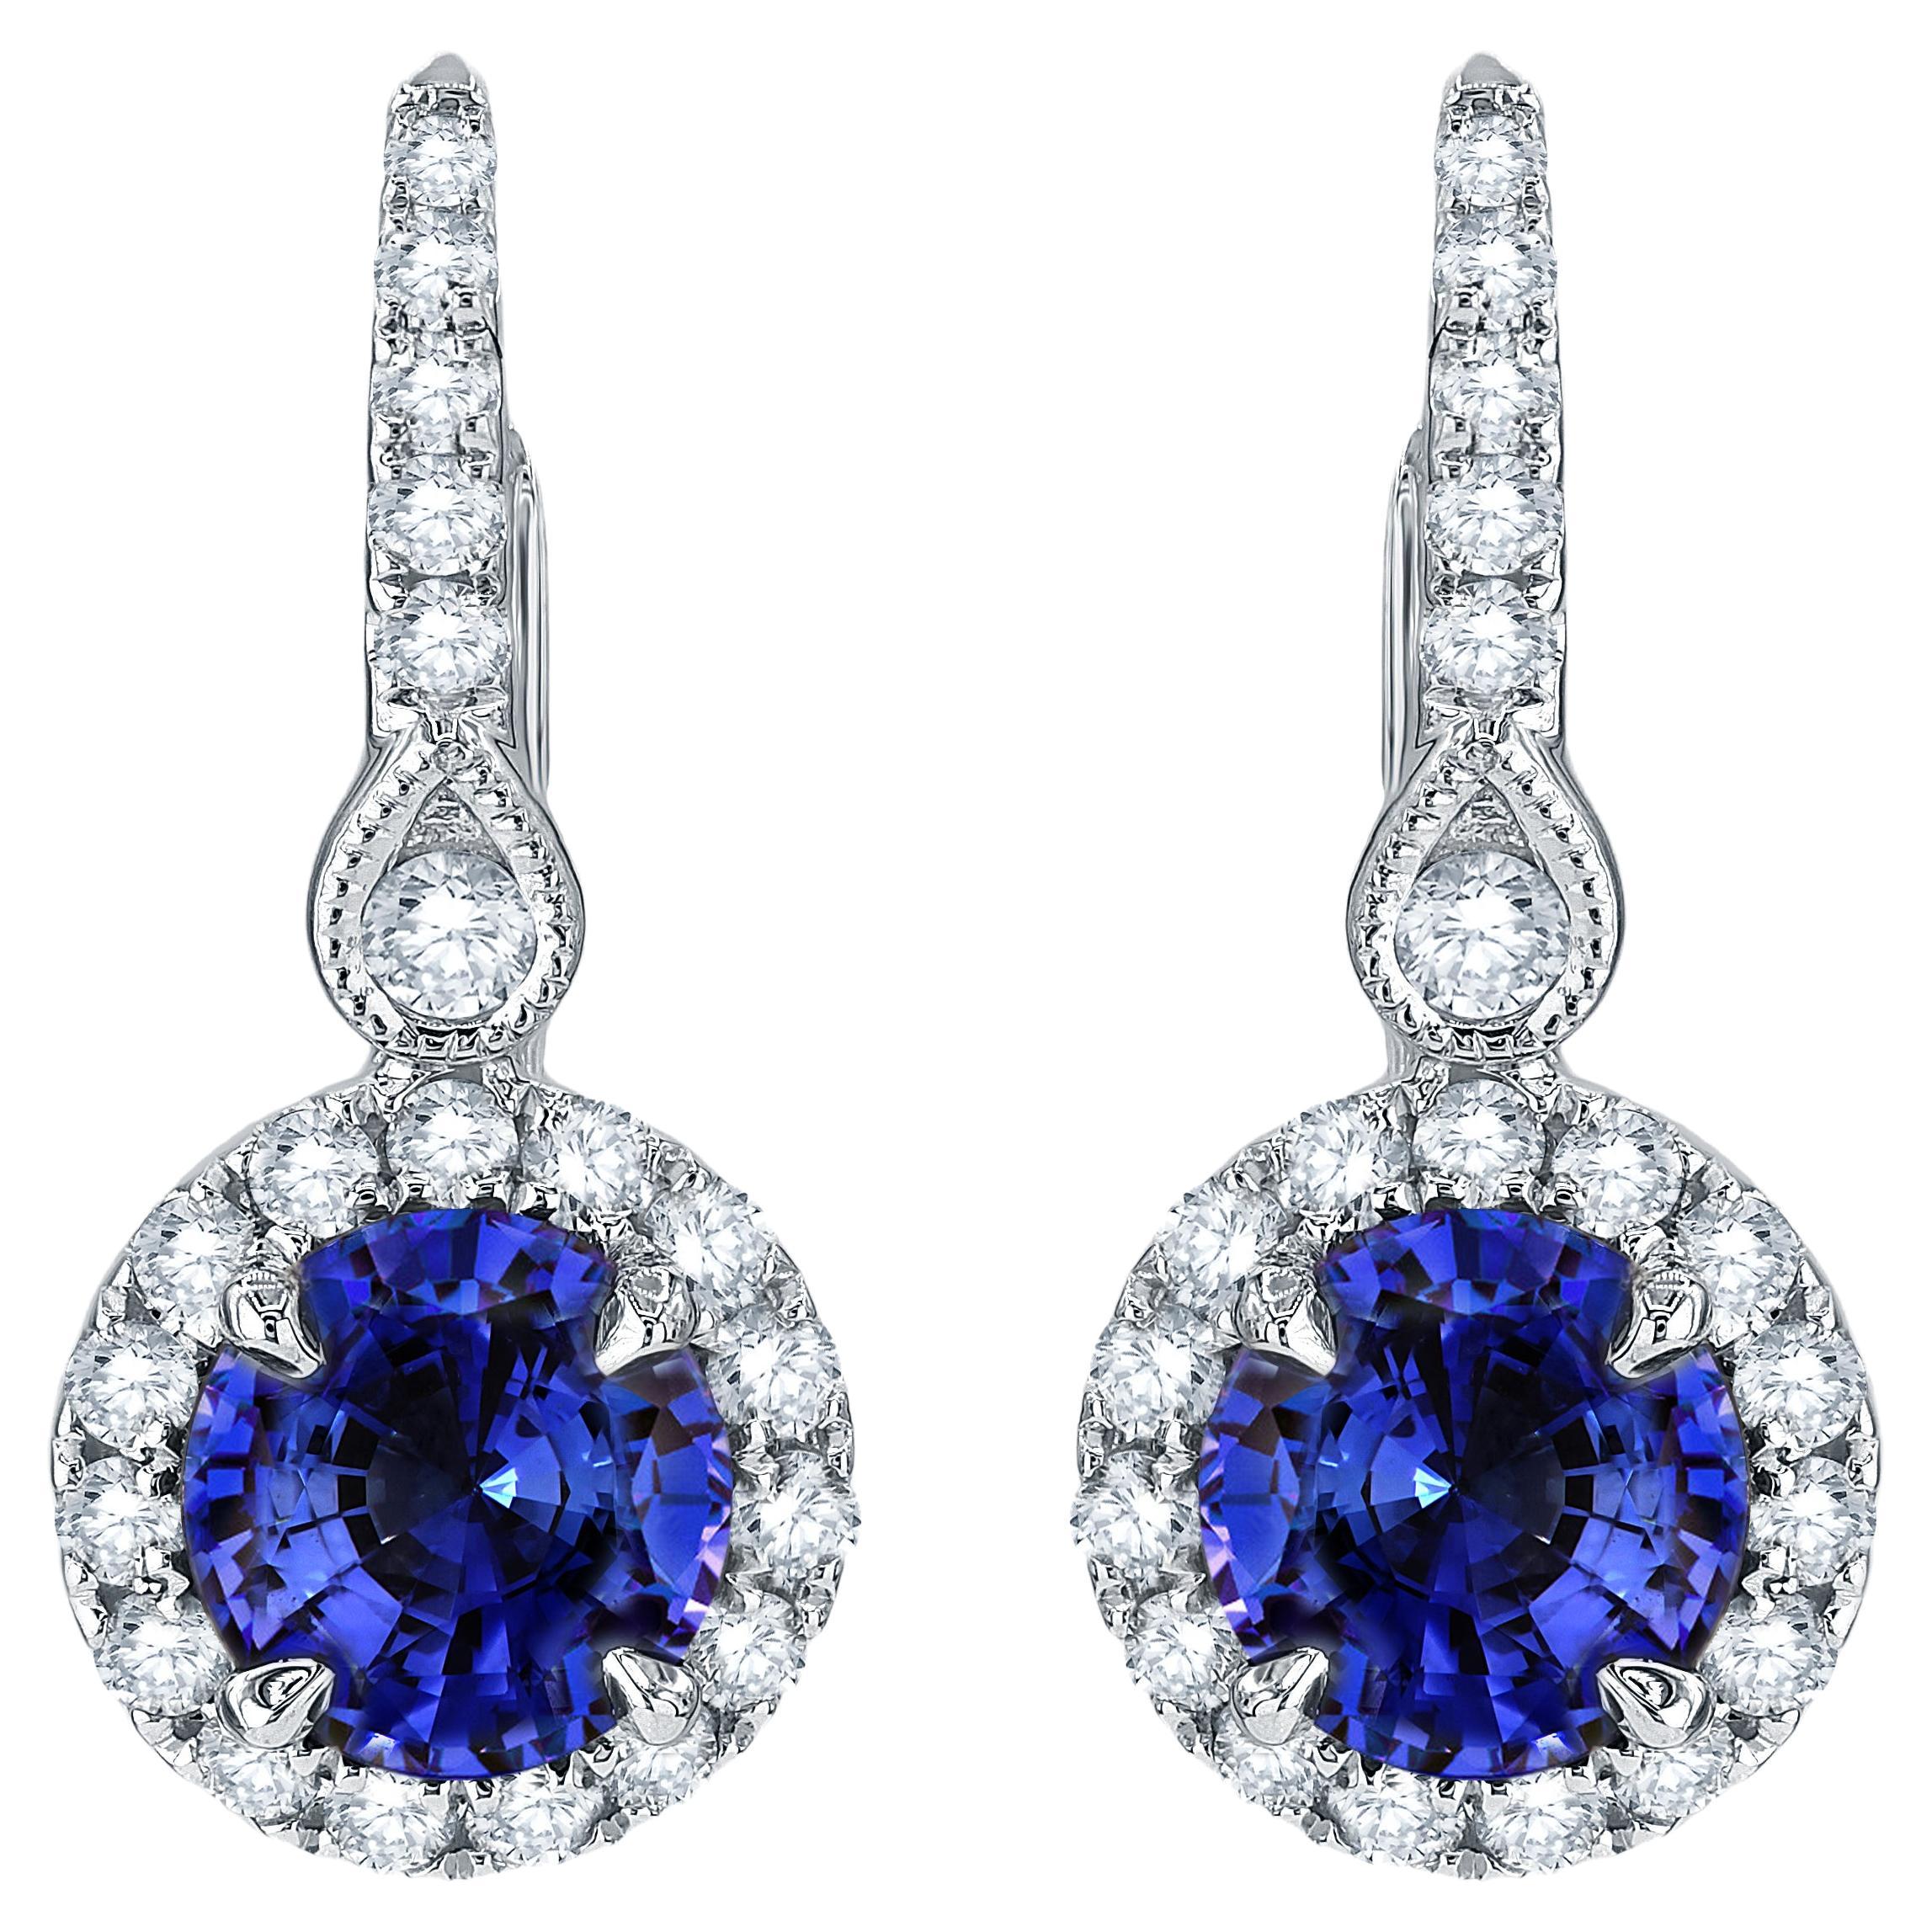 1.57 Carat Round Vivid Blue Sapphire and 0.50 Ct Diamond Earring in 14W ref1900